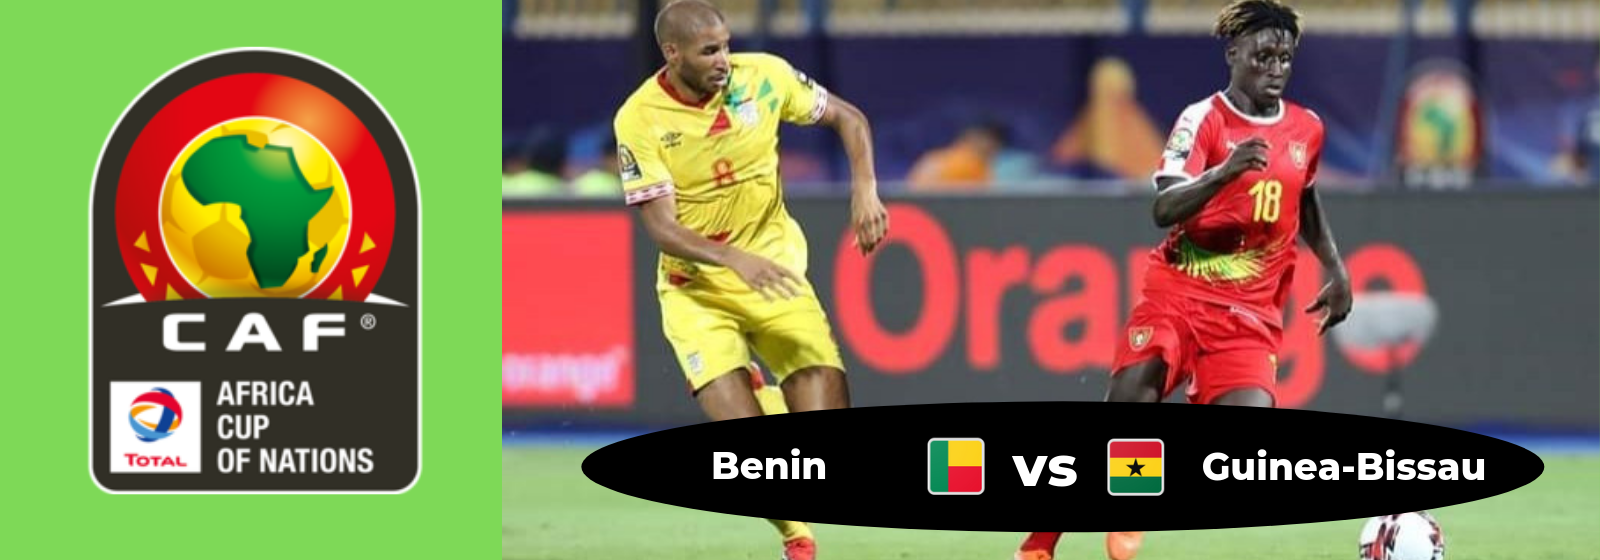 Africa Cup of Nations Benin Vs. Guinea-Bissau Asian Connect